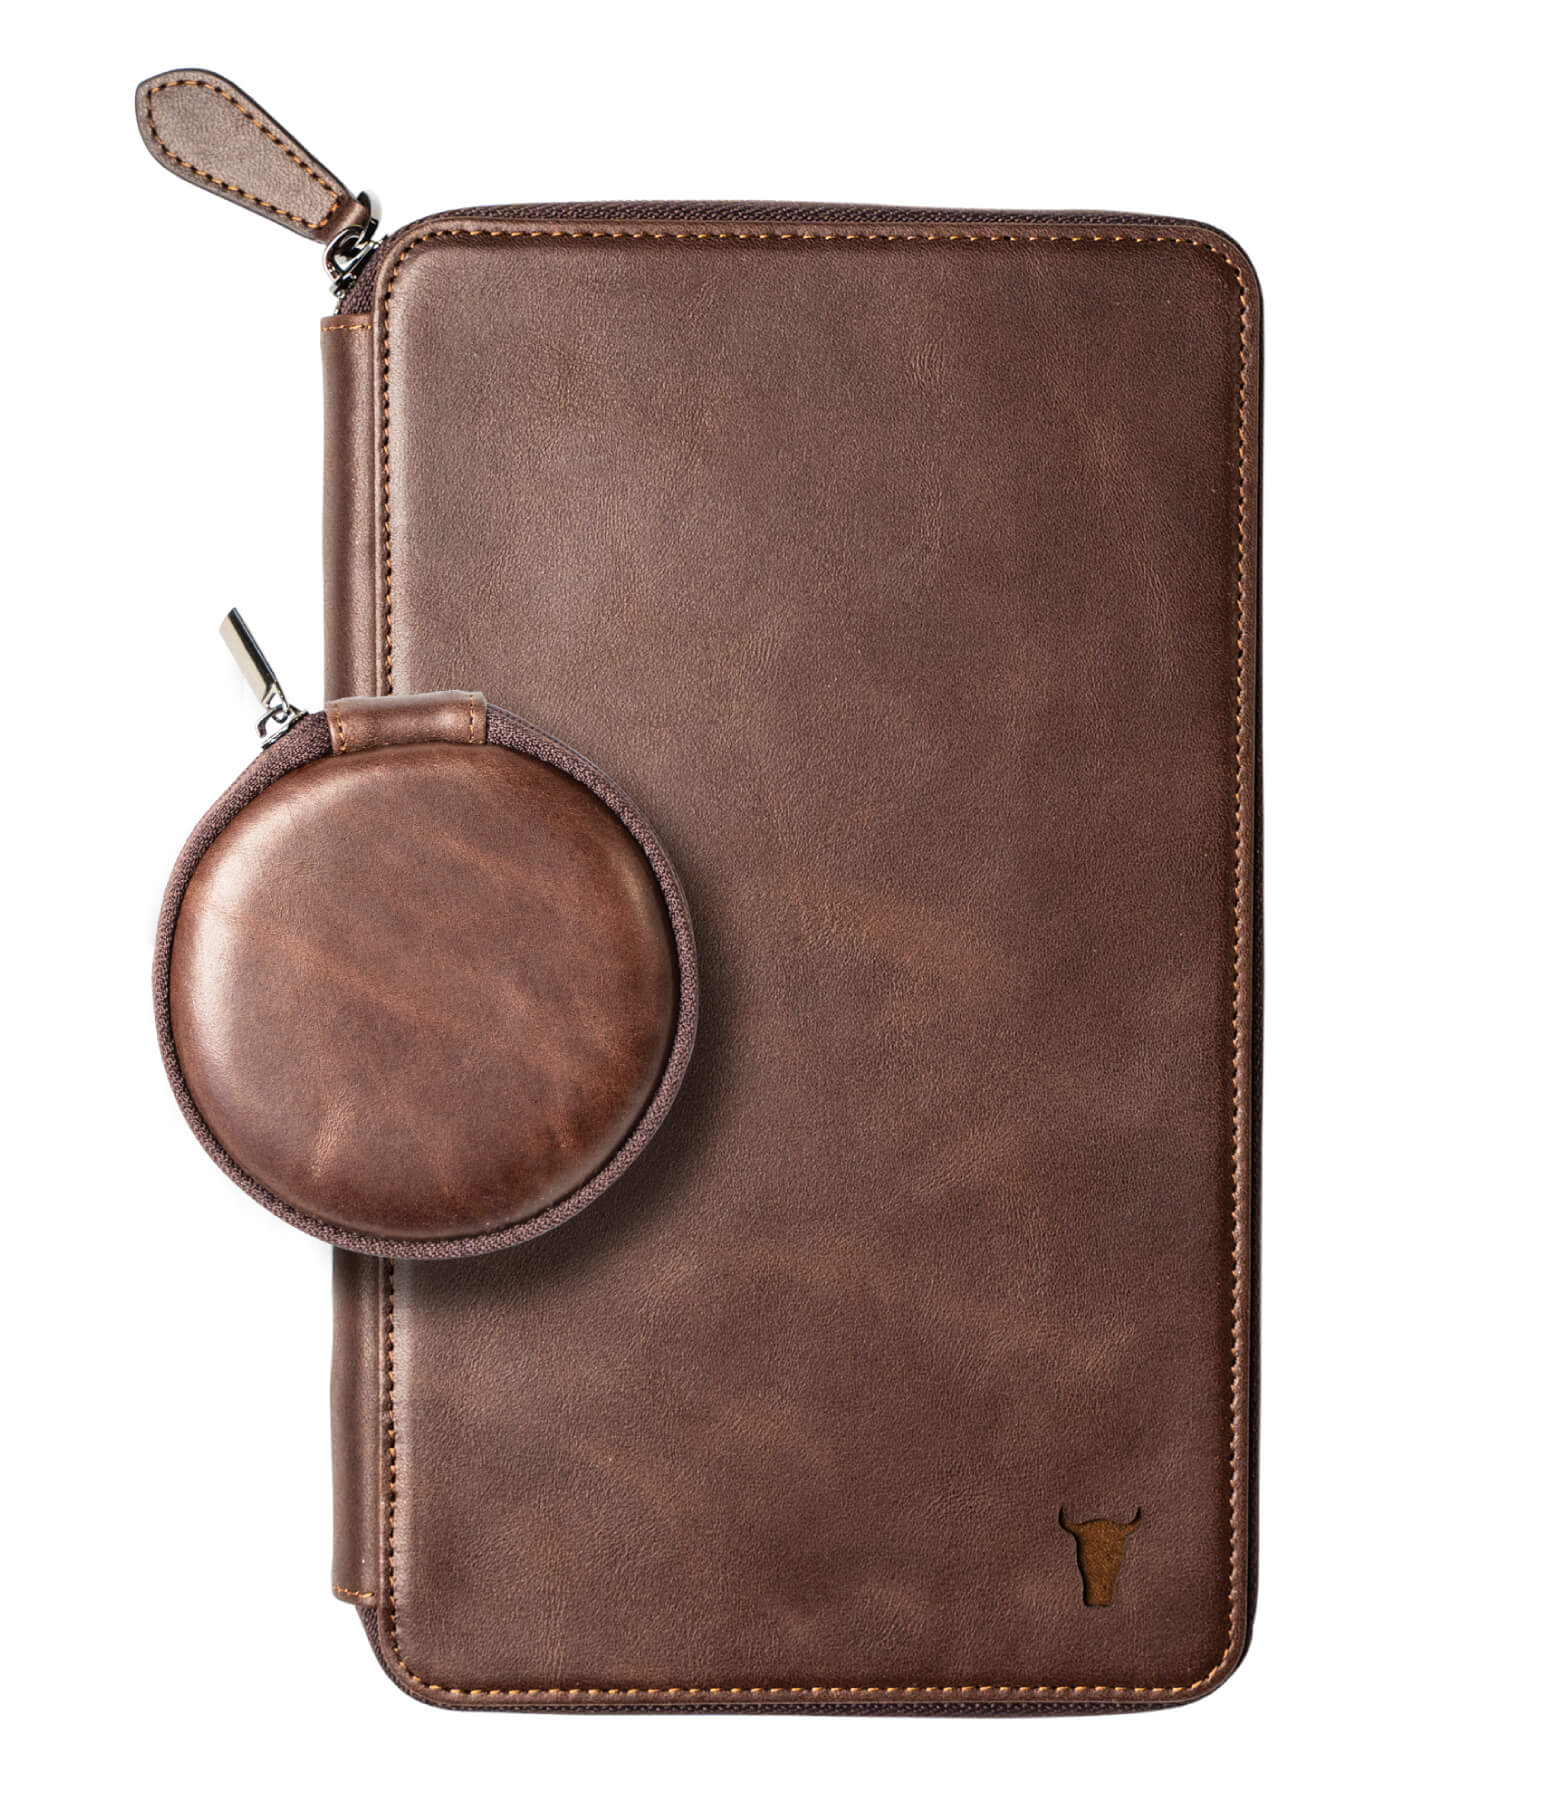 TORRO Large Travel Wallet – Genuine Leather Travel